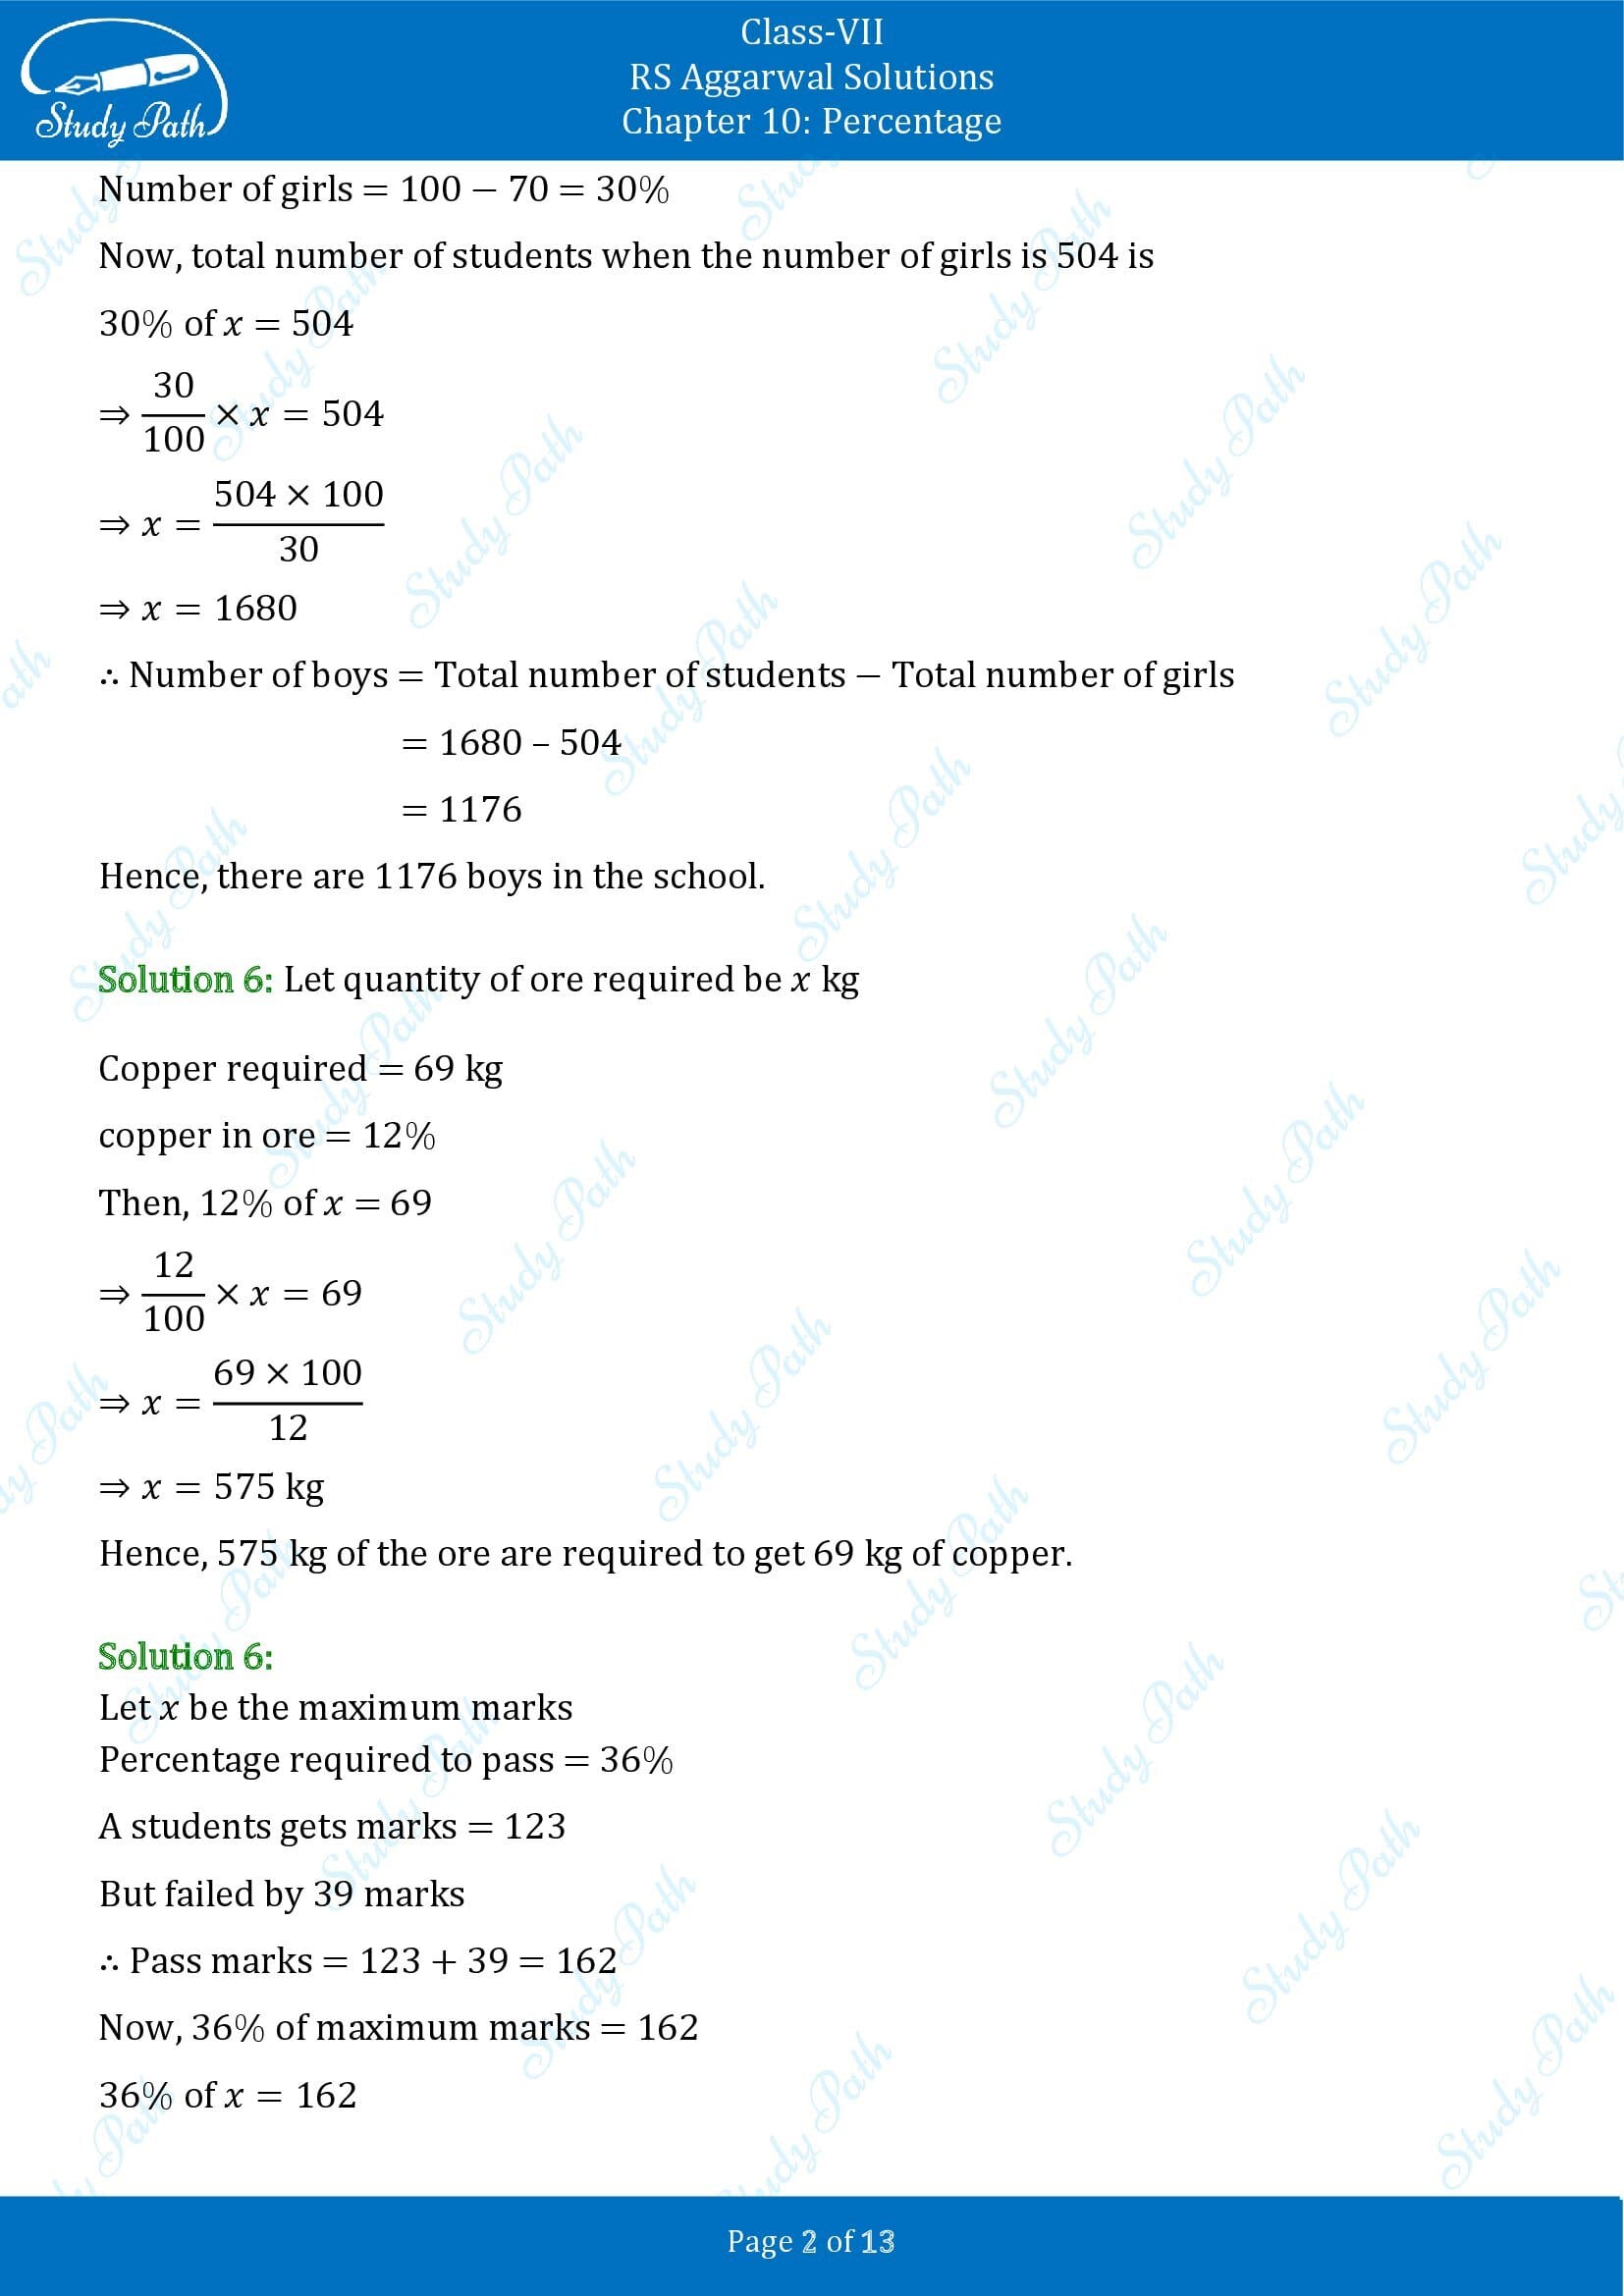 RS Aggarwal Solutions Class 7 Chapter 10 Percentage Exercise 10B 00002